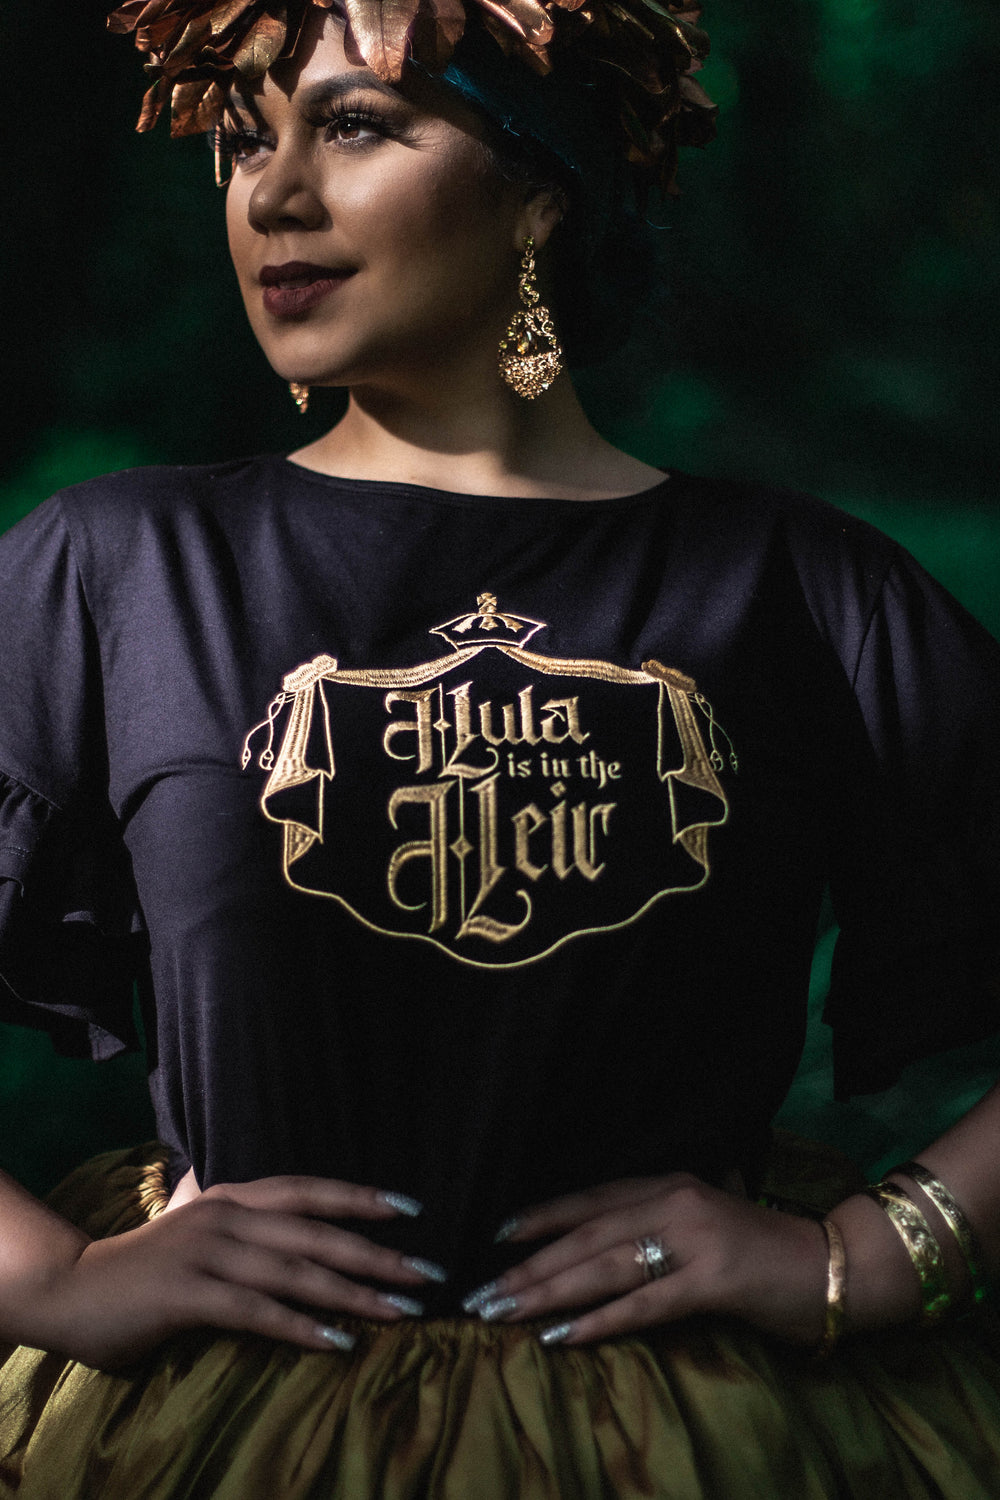 Our flirty, ruffled Līhau Blouse will make you feel like the Queen you are! This top features our gold, metallic "Hula is in the Heir" code of arms design embroidered on the chest and made in a soft, viscose spandex.  